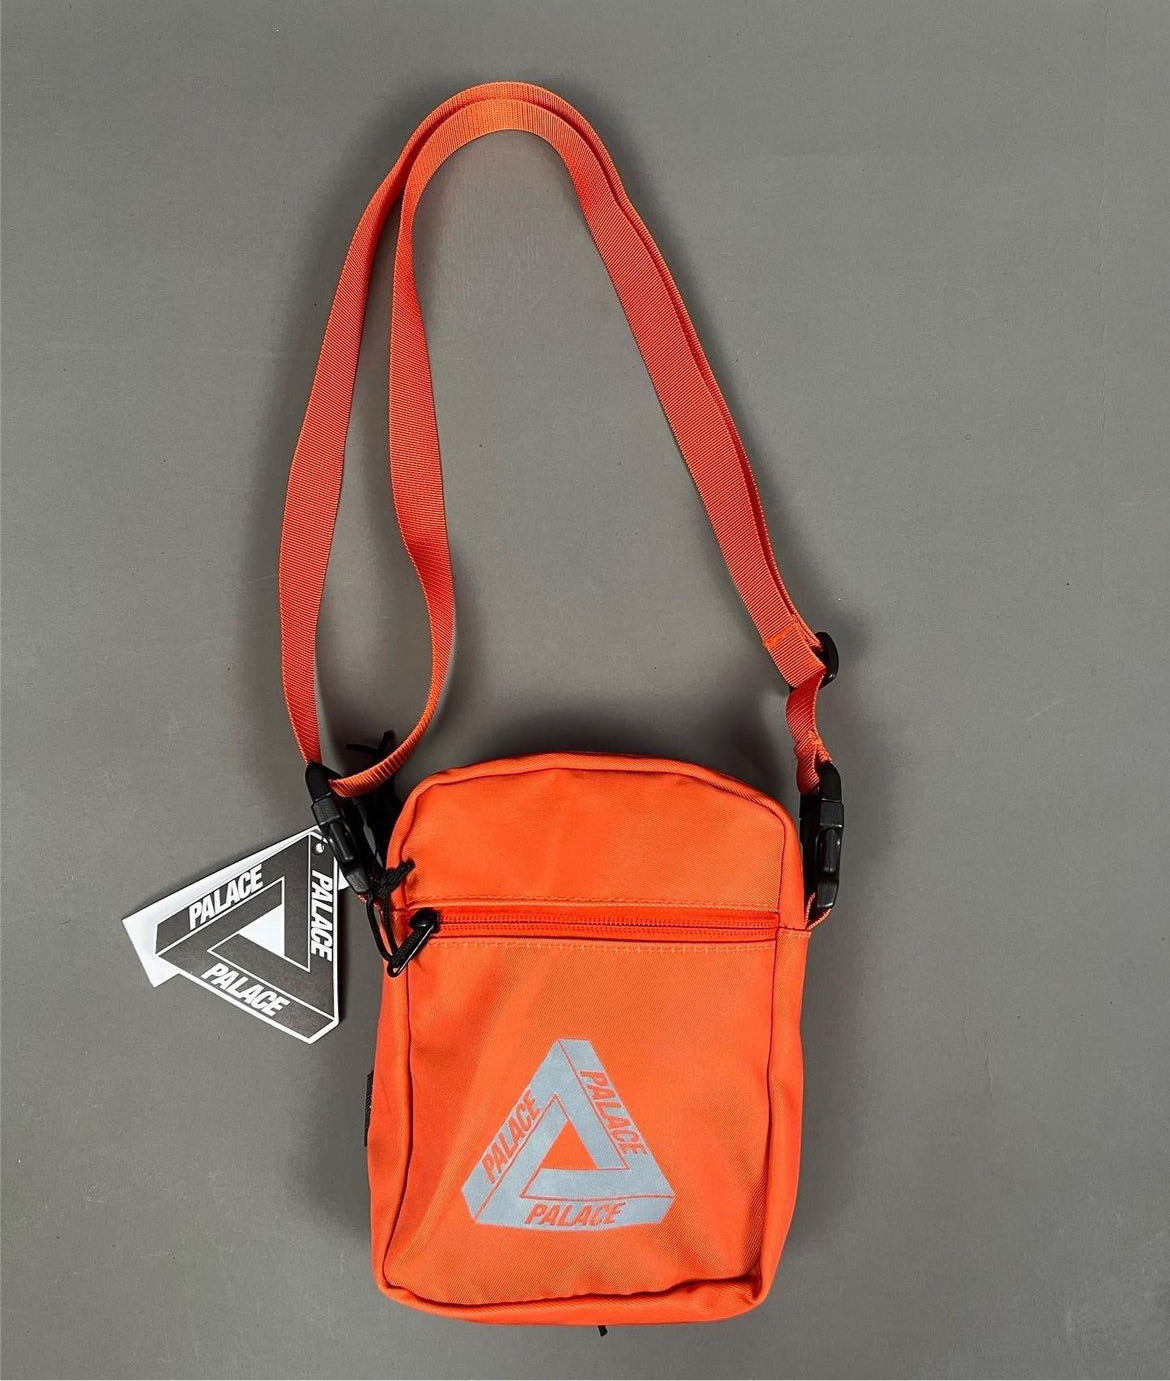 PALACE cross body bag available in orange